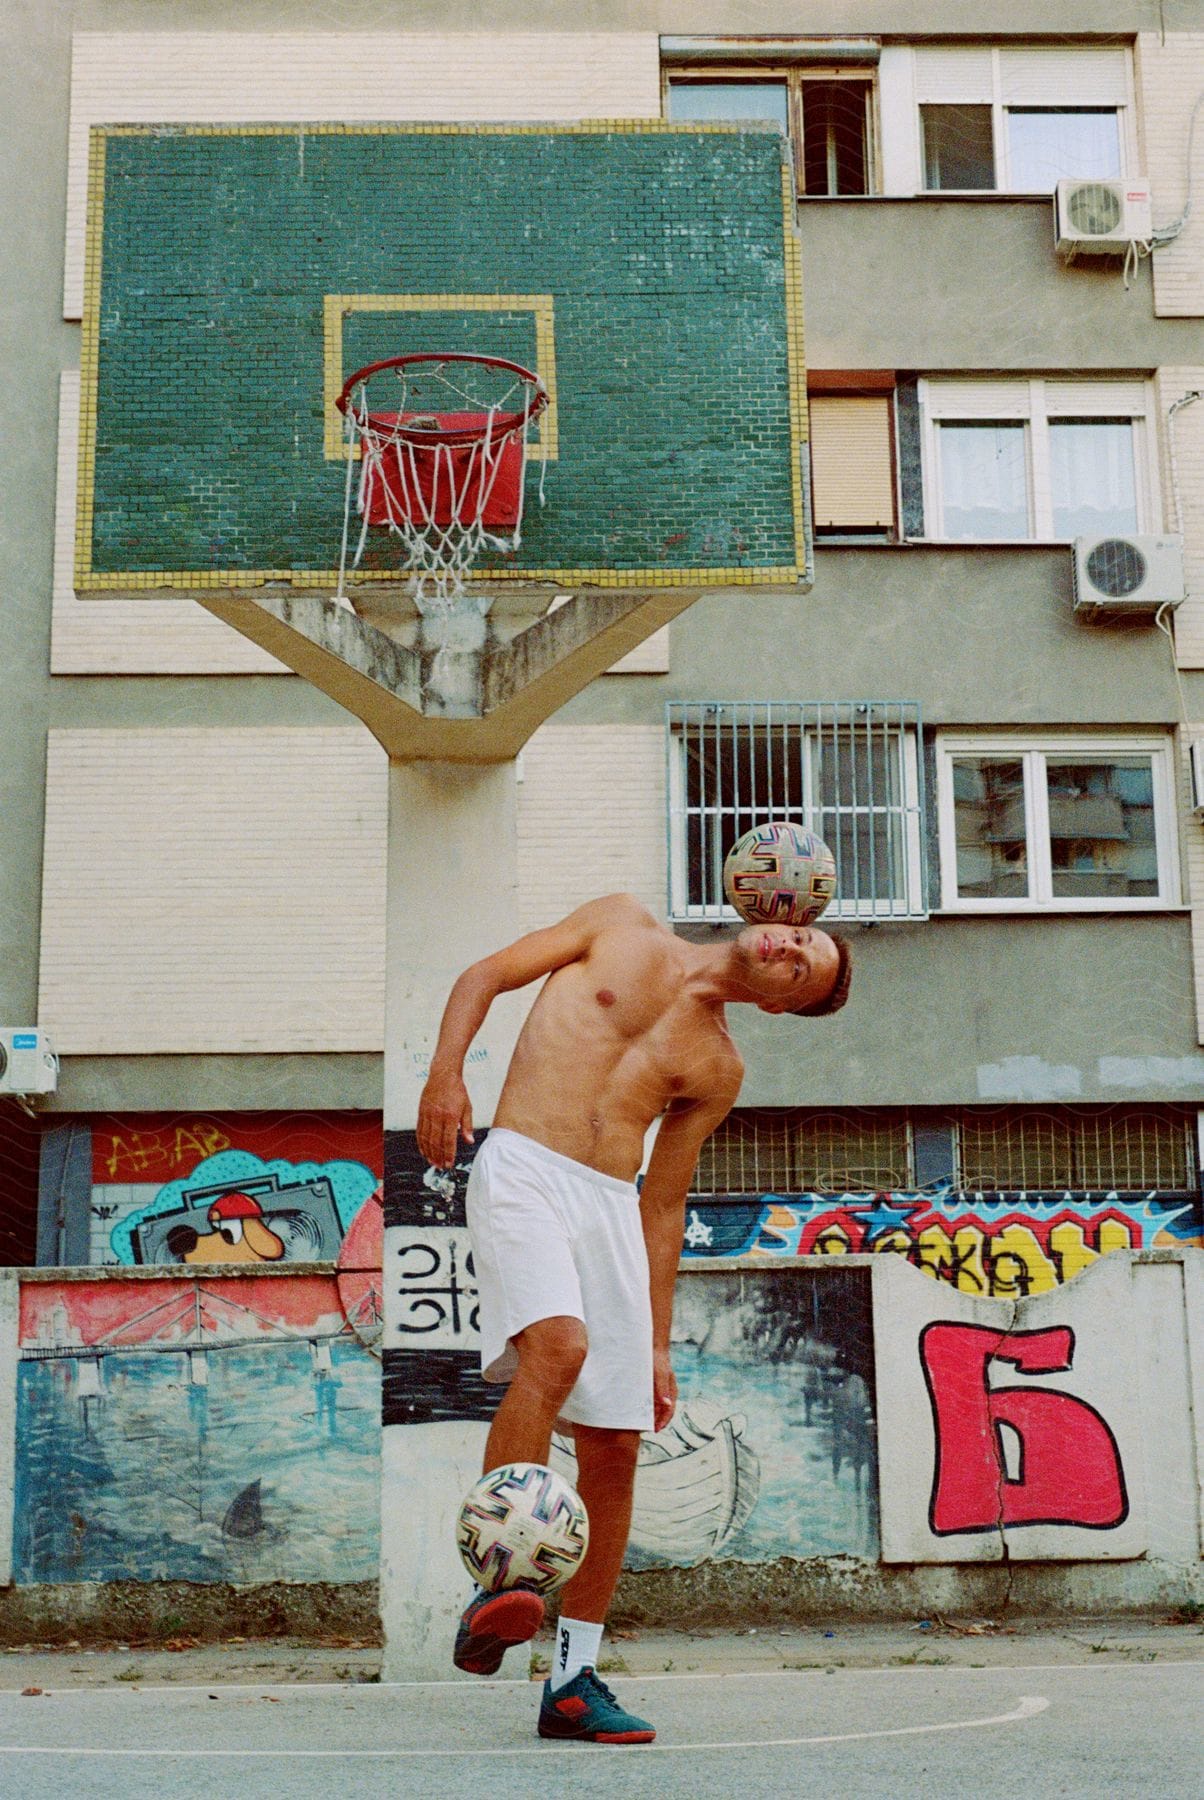 A shirtless person balances a soccer ball on their head in front of a graffiti-covered wall and a weathered basketball hoop.